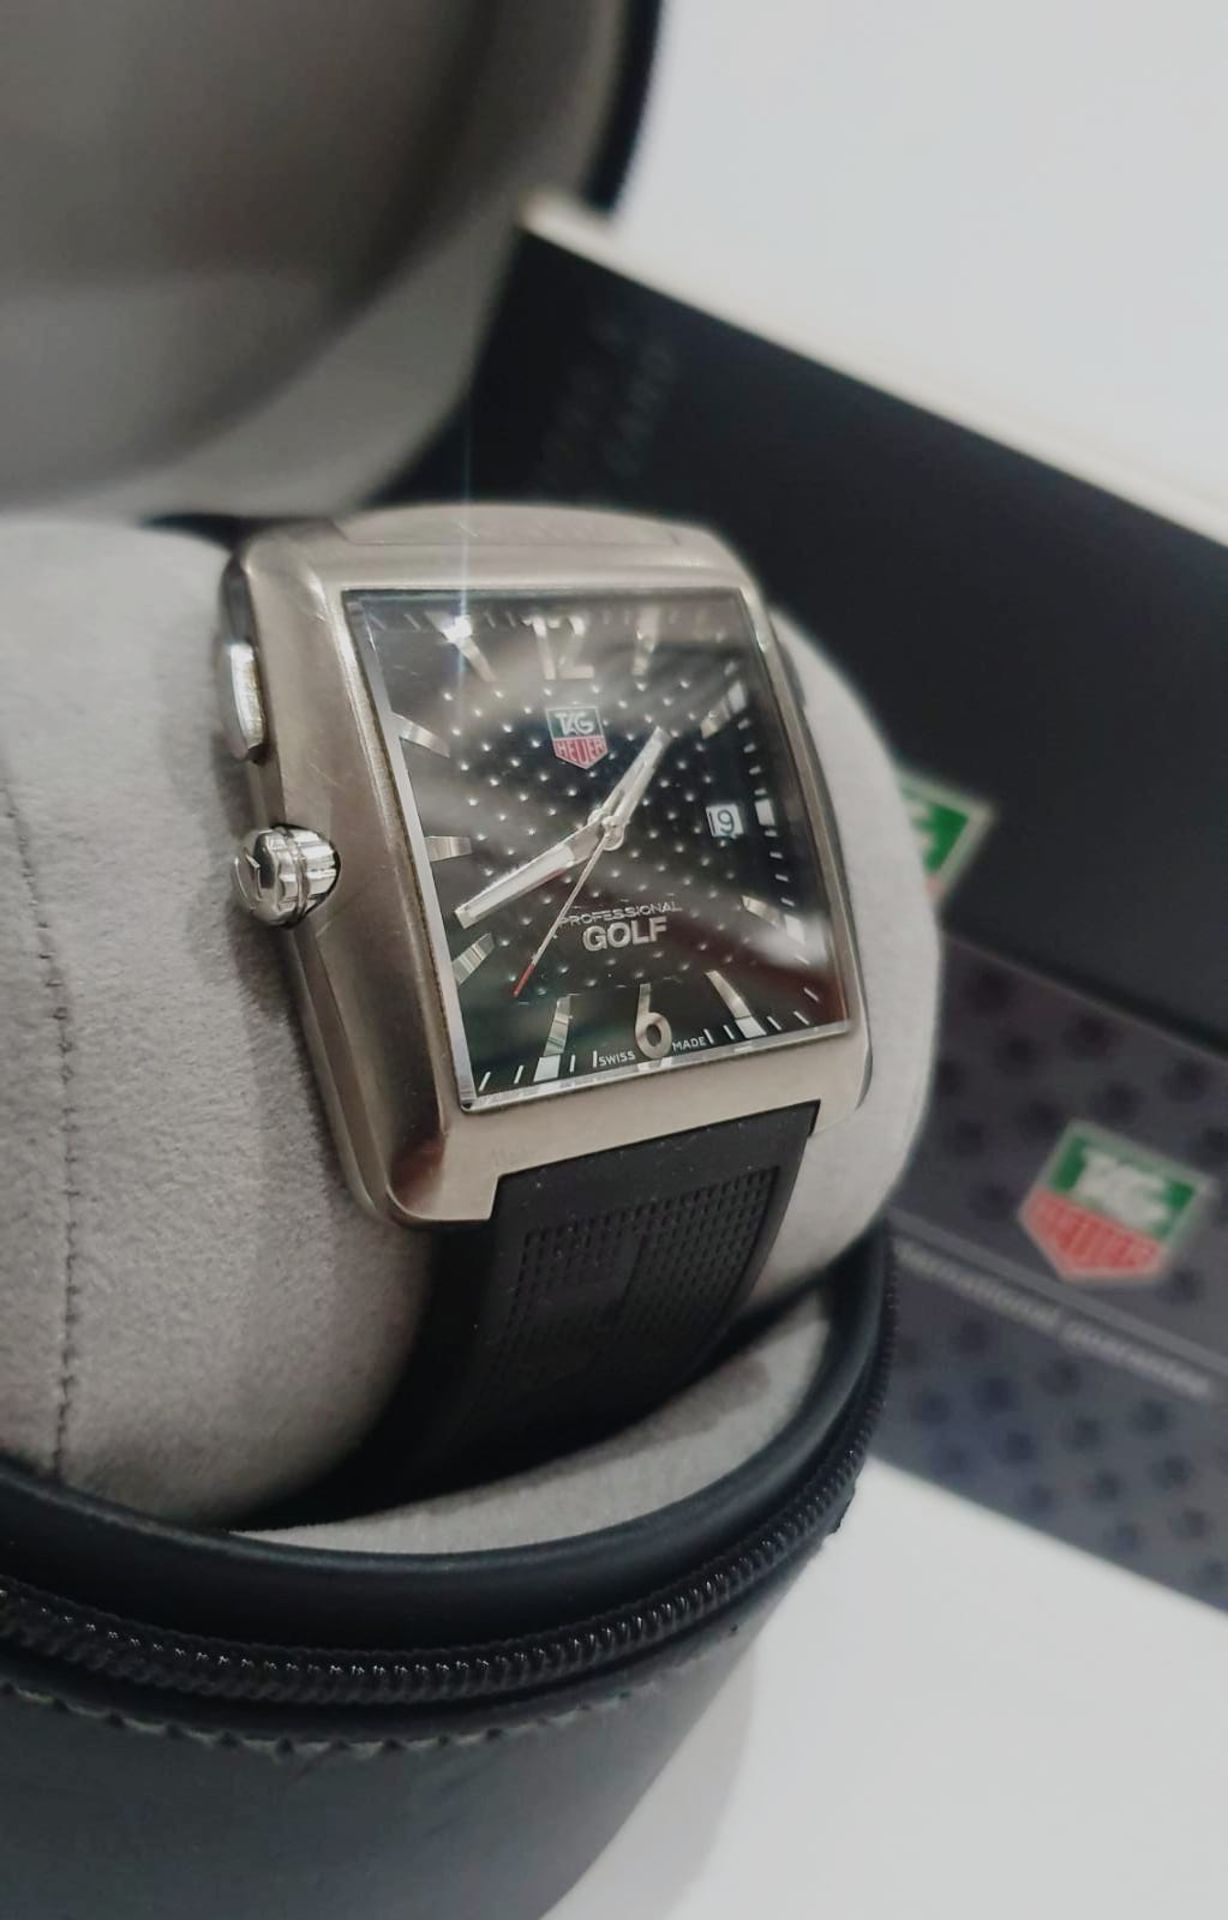 TAG HEUER GOLF TIGER WOODS LIMITED EDITION MENS WATCH, BOXED *NO VAT* - Image 4 of 12